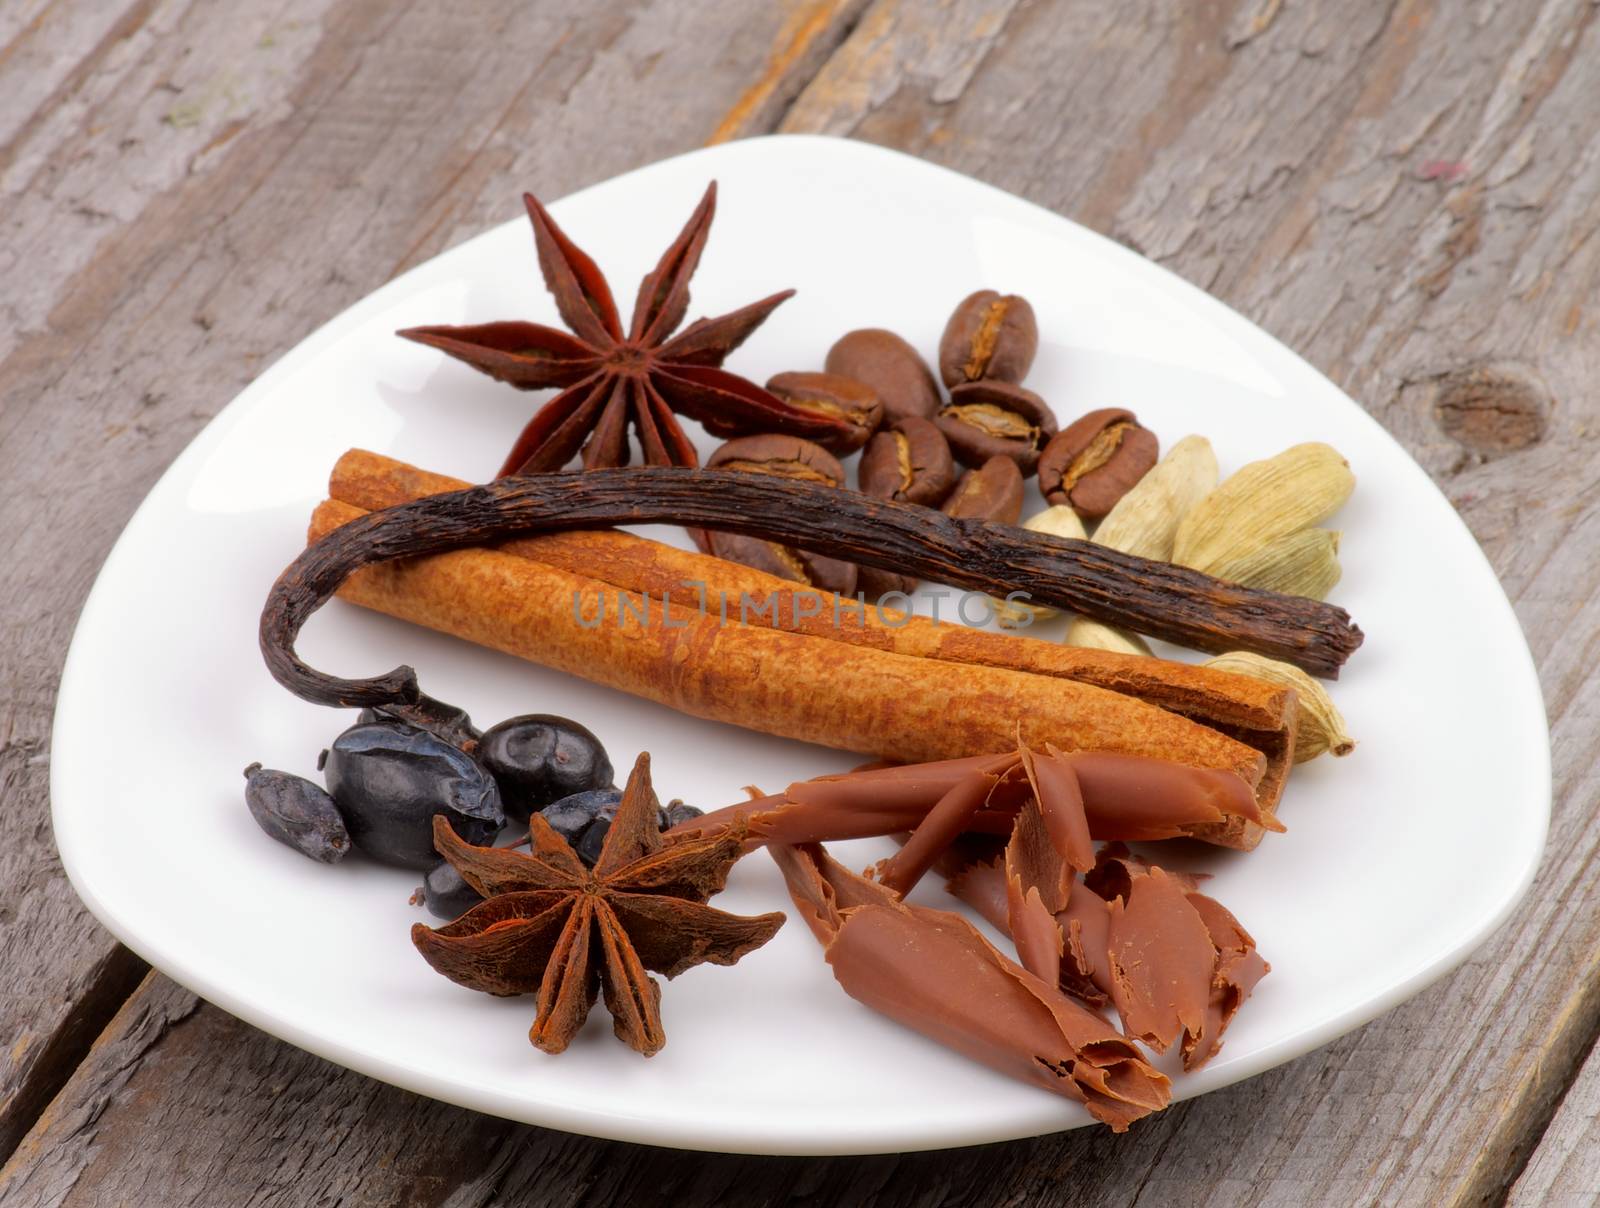 Arrangement of Chocolate Slices, Vanilla Pods, Anise Stars, Cardamon and Coffee Beans on White Plate isolated on Wooden background